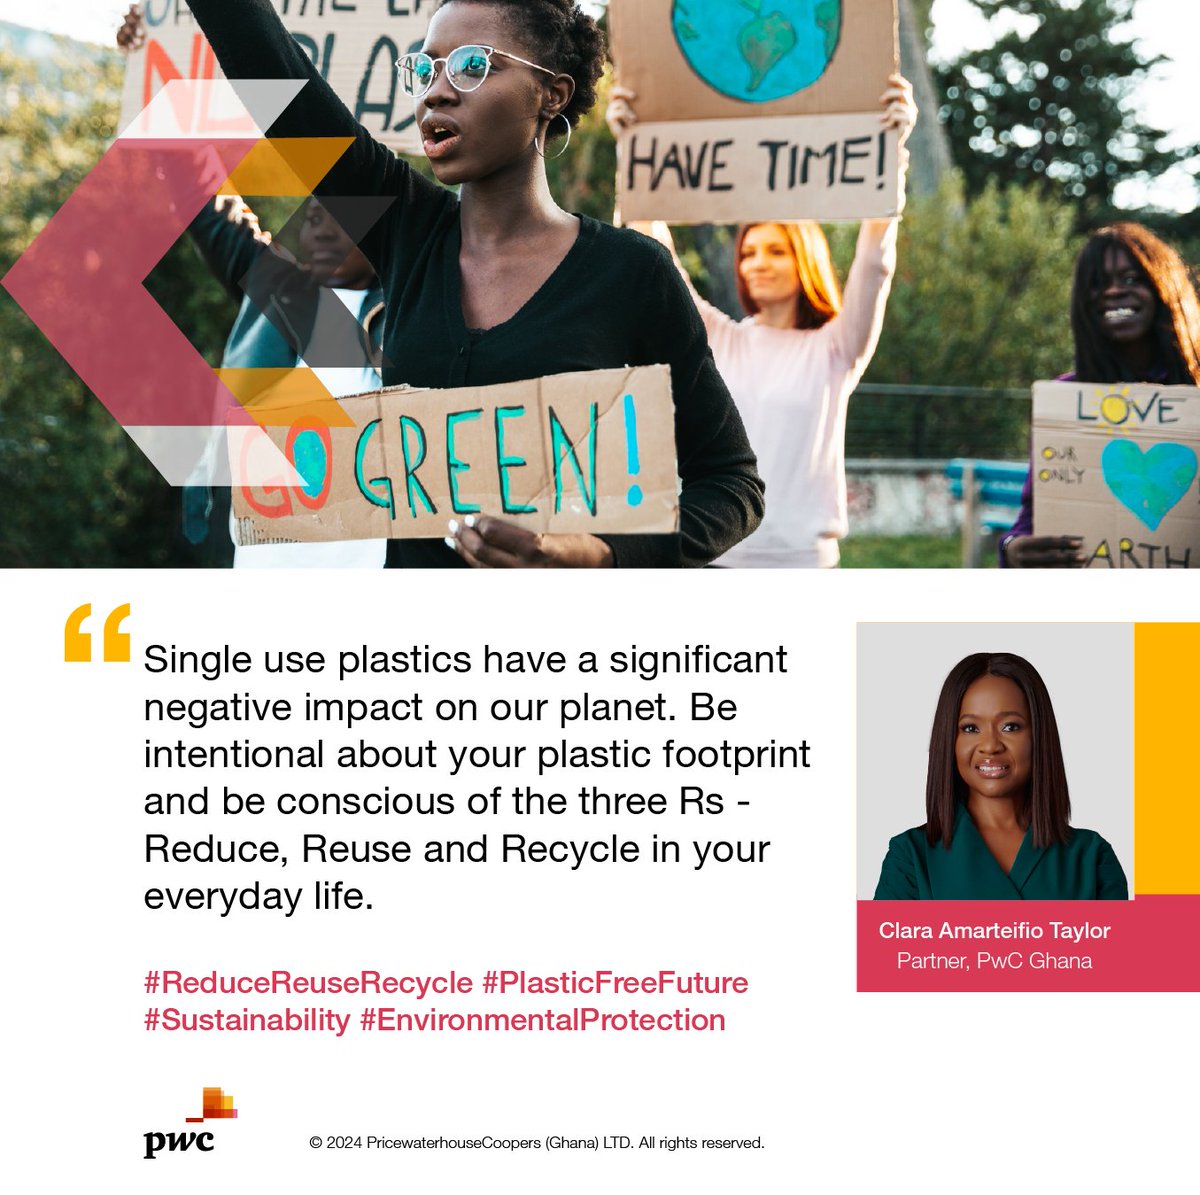 Every small change adds up to a big impact on our planet. Choose reusable over disposable and say goodbye to plastic waste. 

#PwCProud #ESG #Environment #BreakFreeFromPlastic